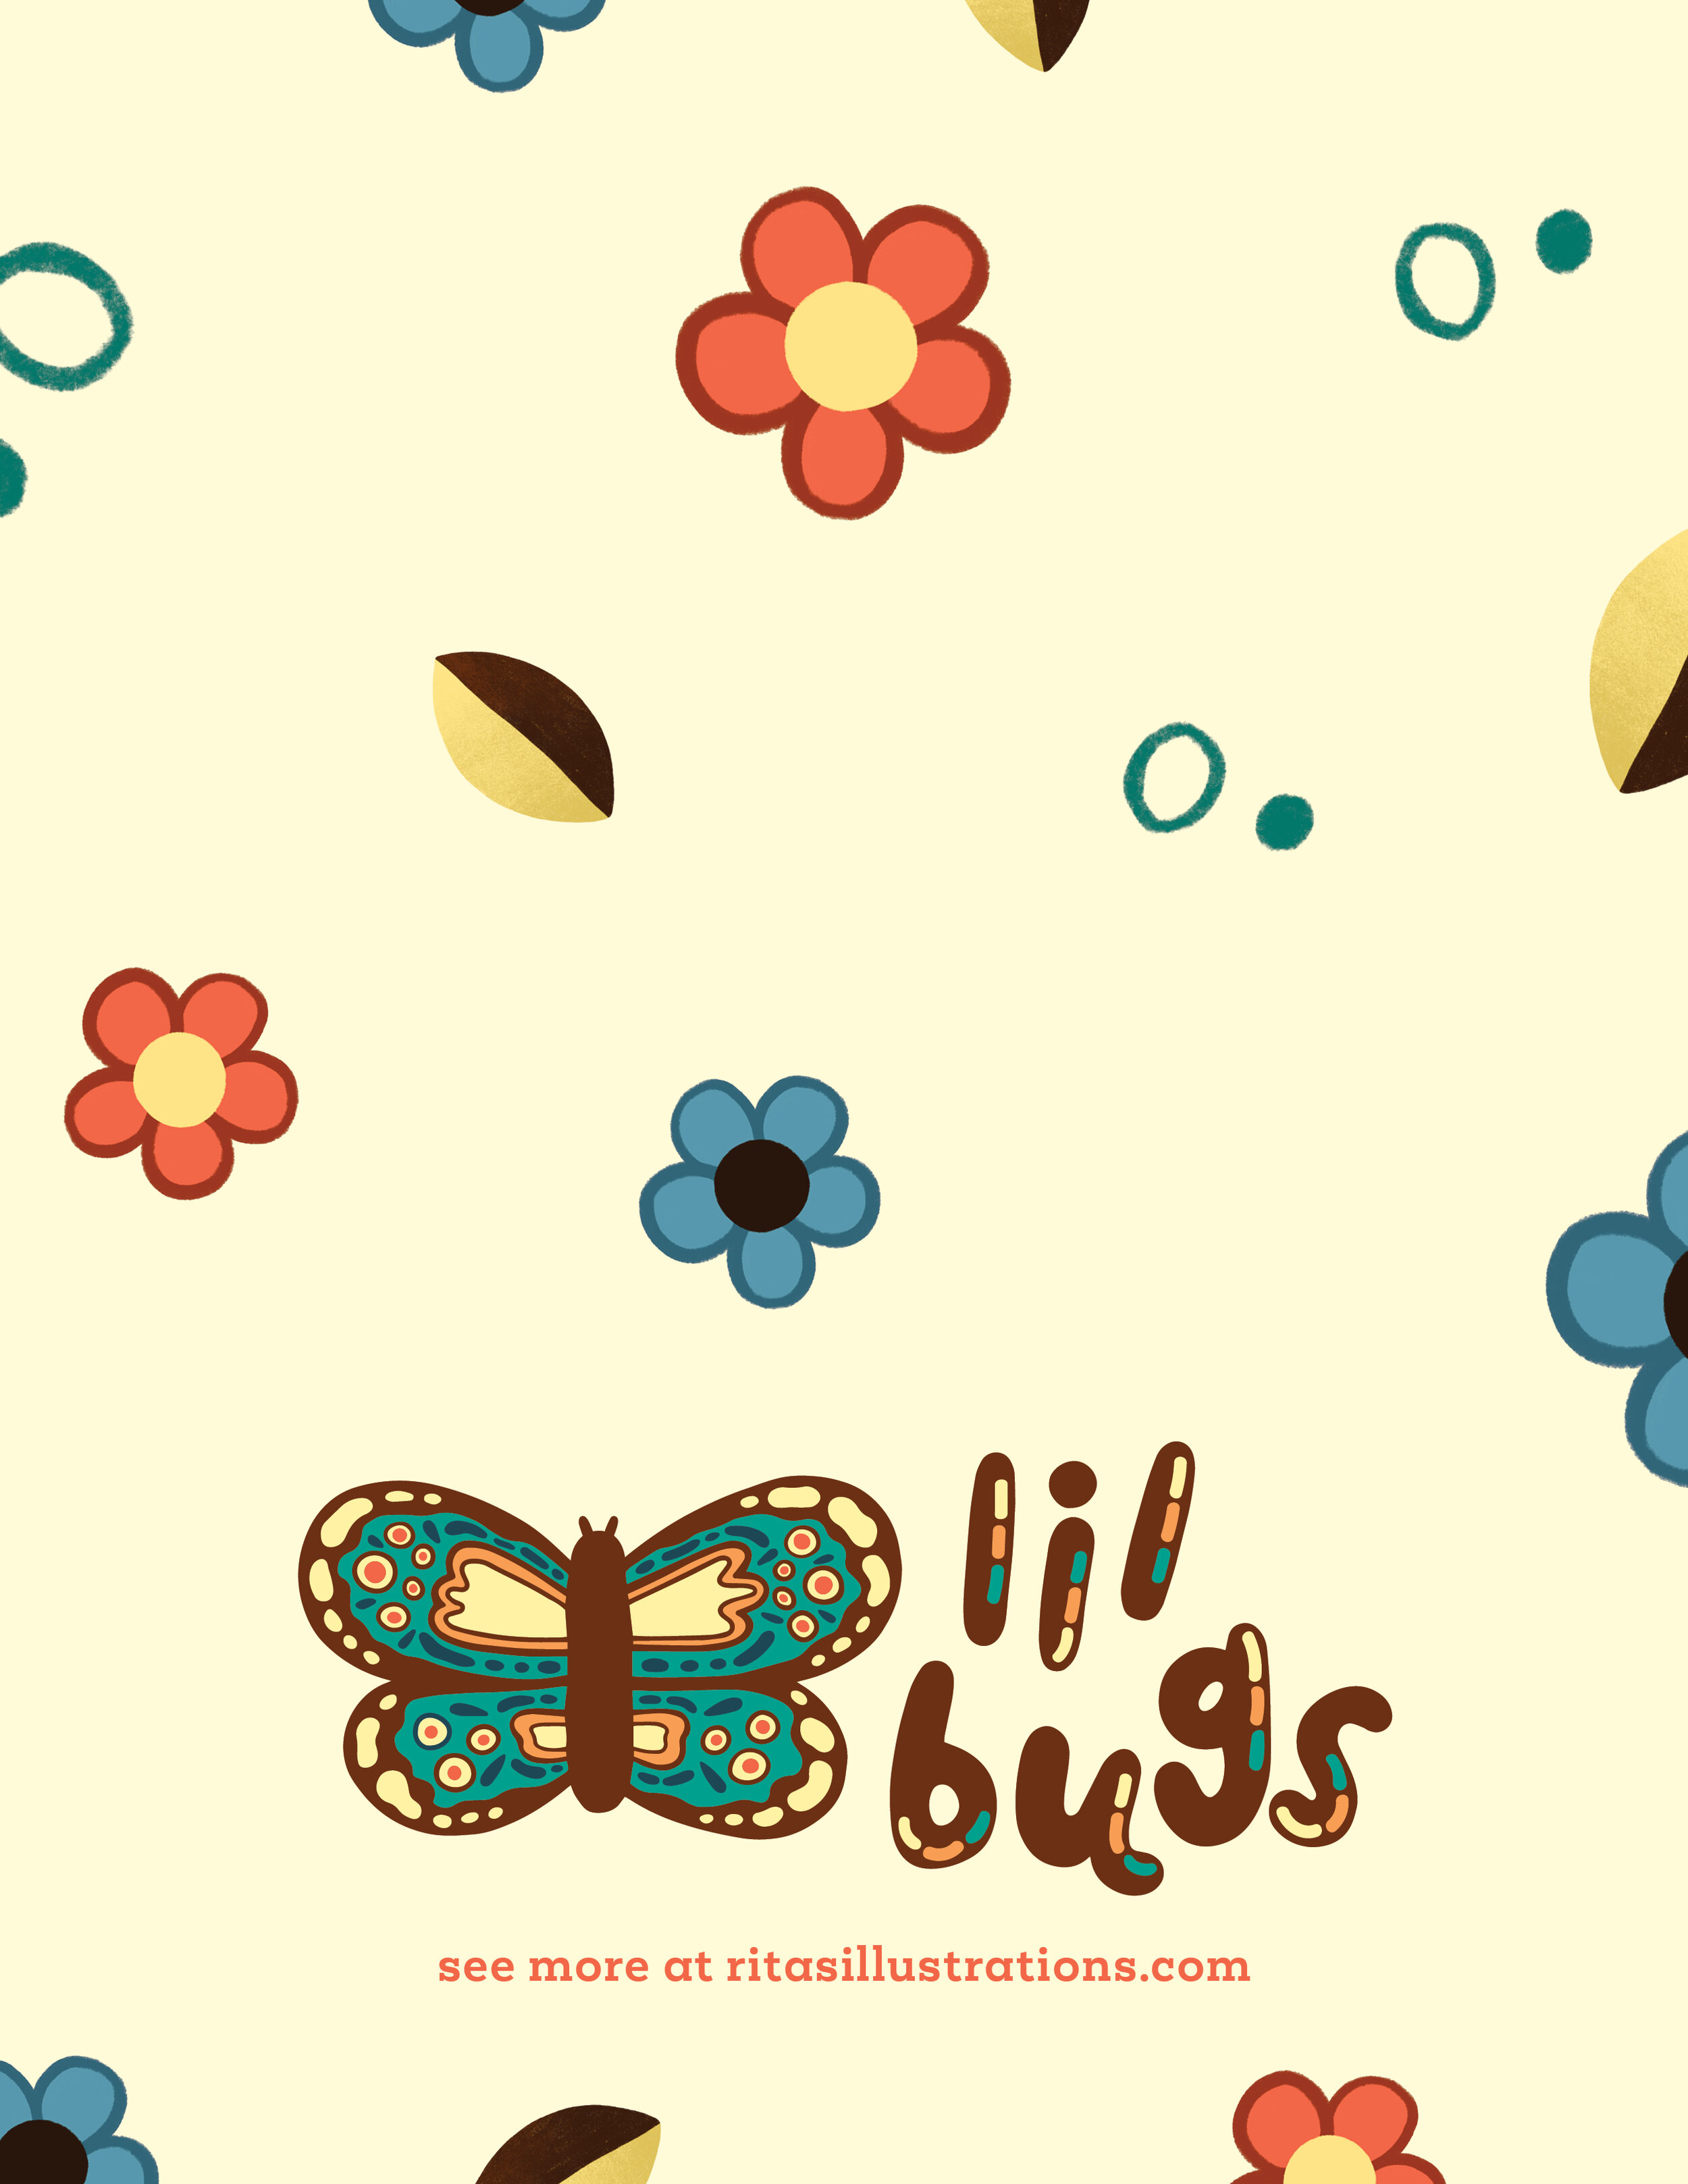 Richardson_Thesis_Lil Bugs Collection Catalog11.jpg